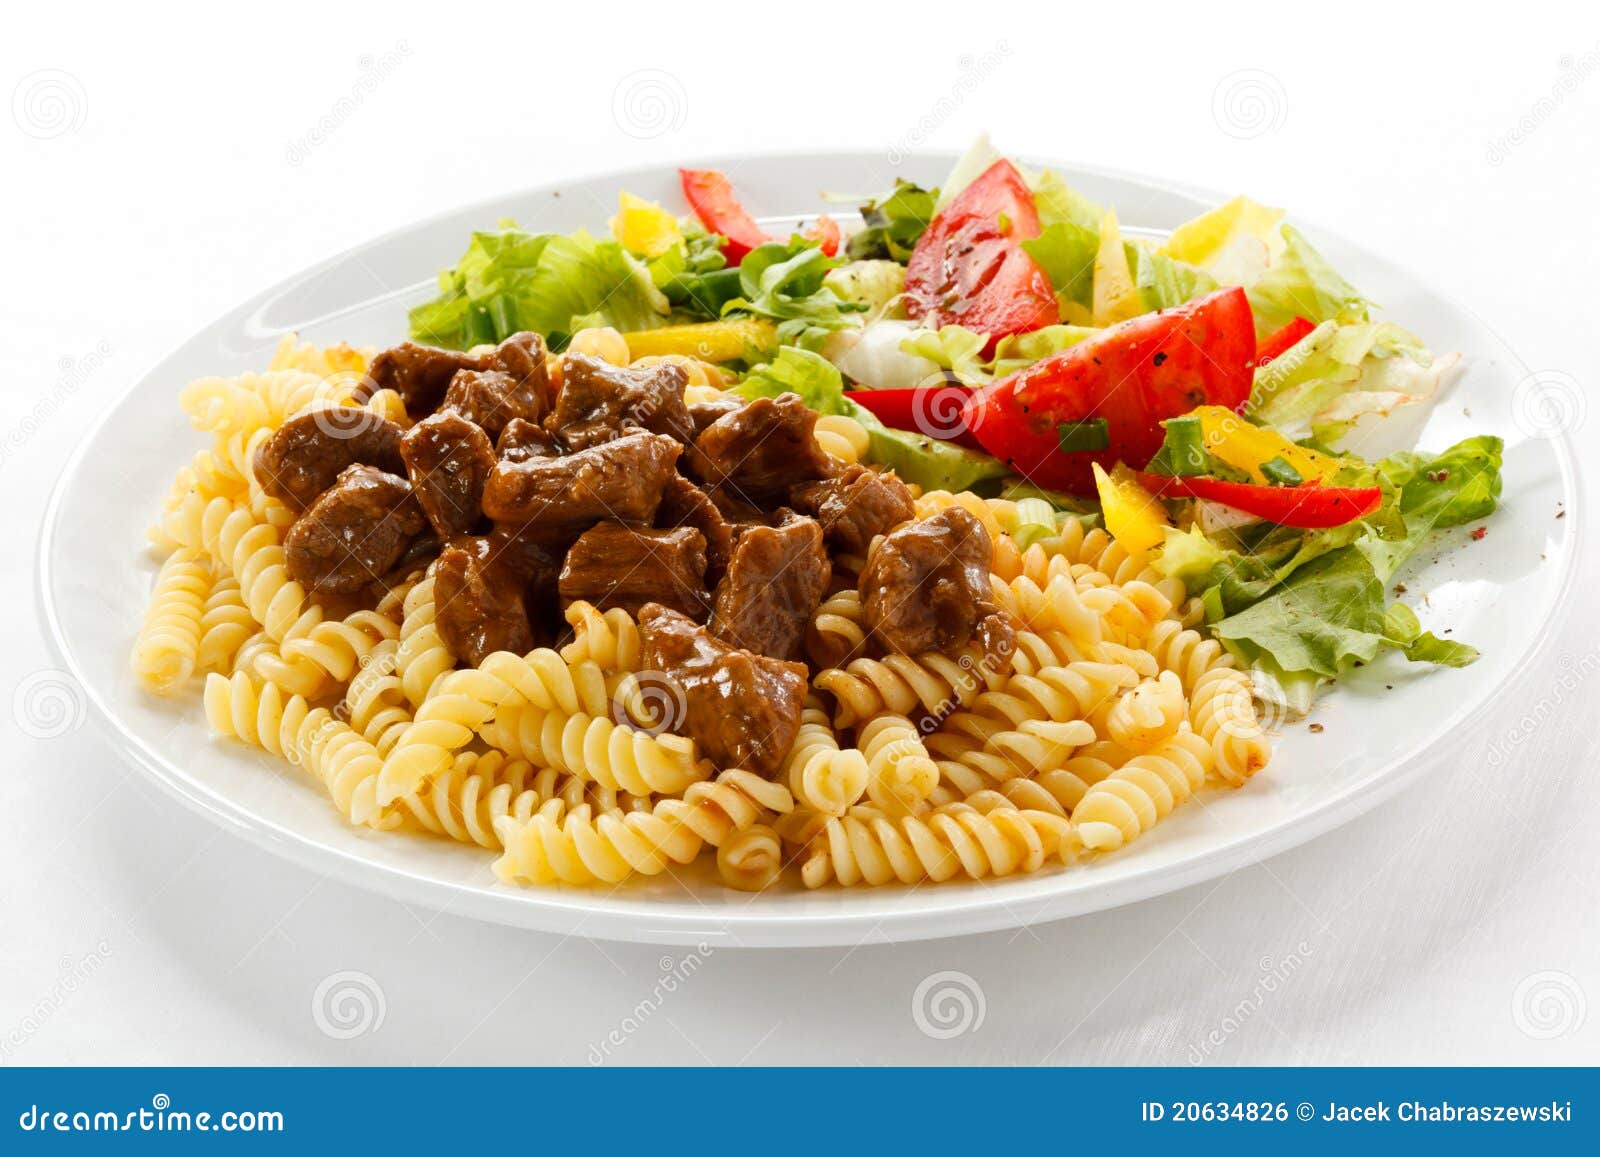 Pasta With Meat Royalty Free Stock Image - Image: 20634826